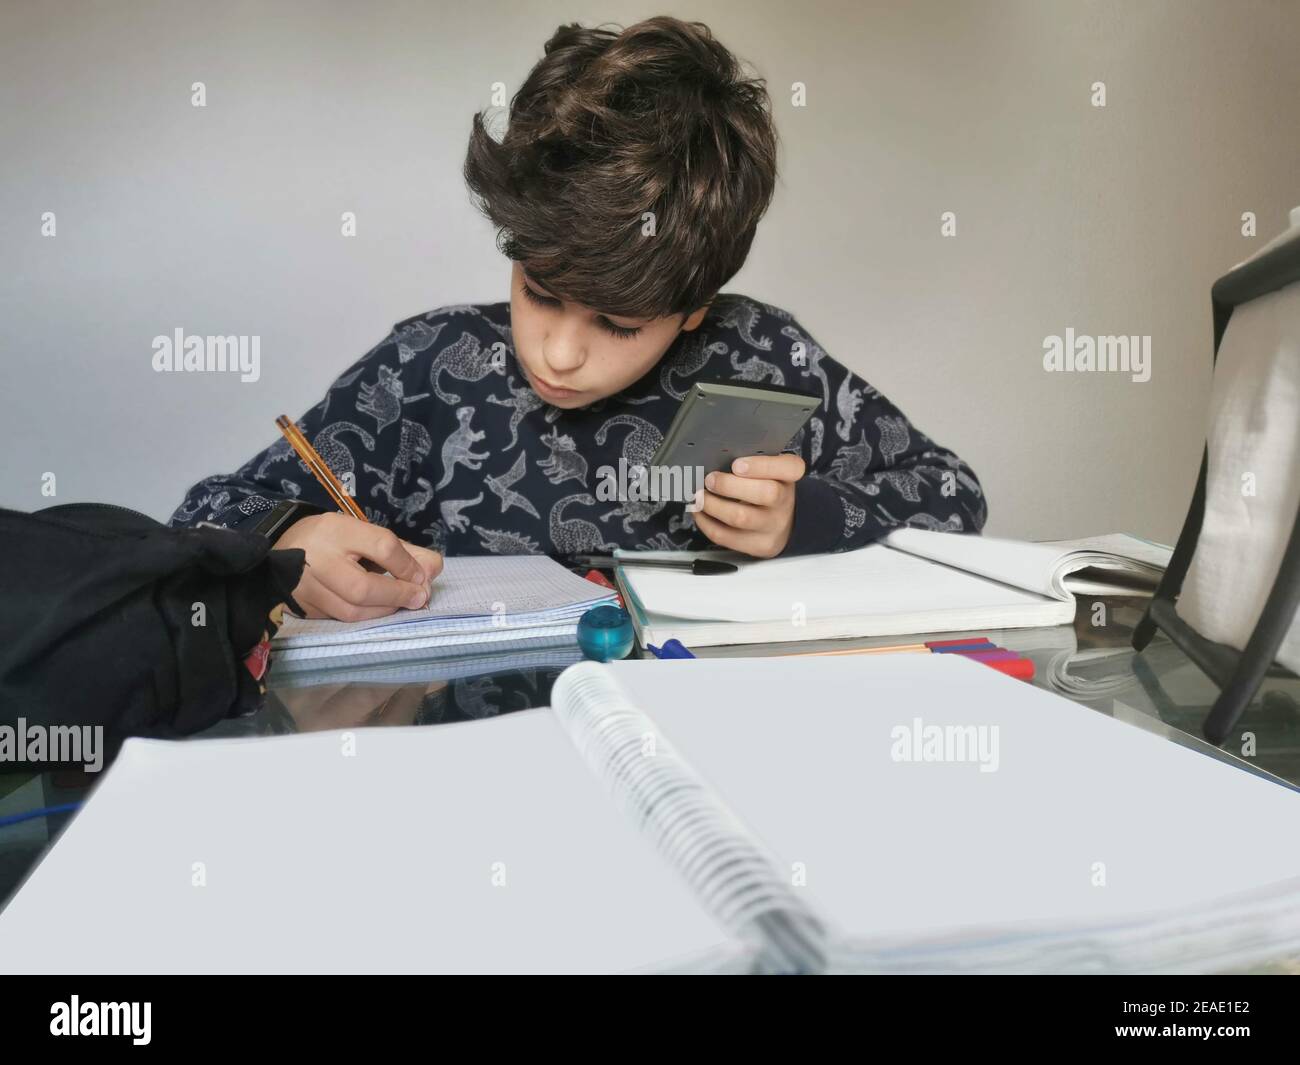 Home scene. Times of covid 19. Child applied and serious, doing homework and reading carefully Stock Photo